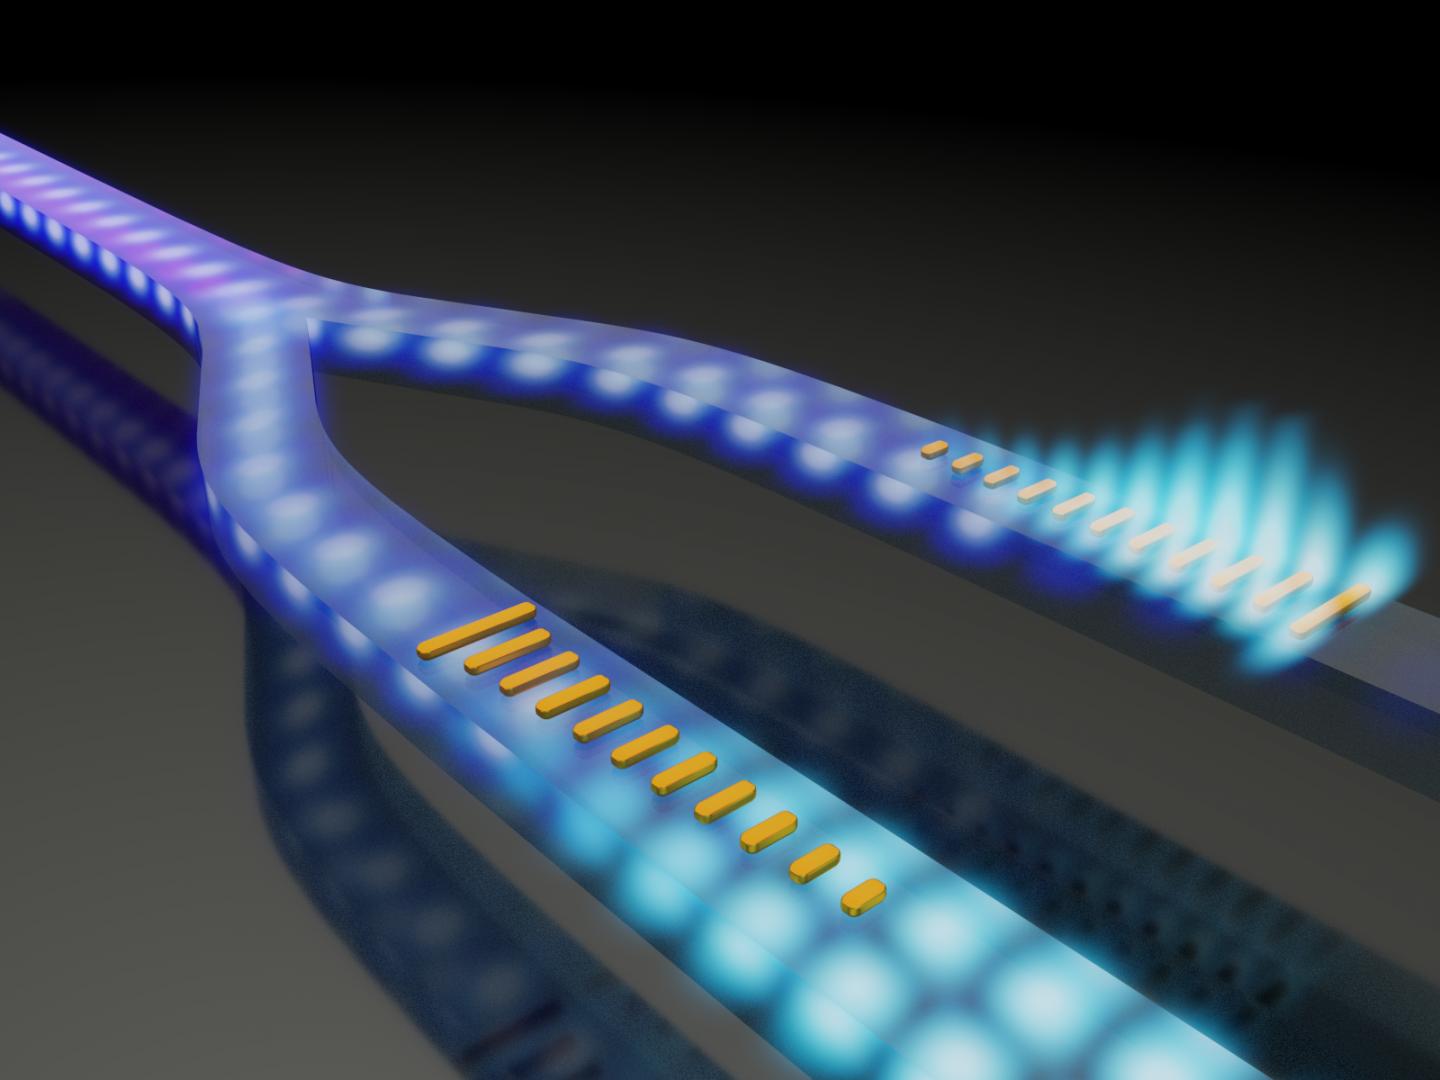 Artistic Illustration of a Photonic Integrated Device